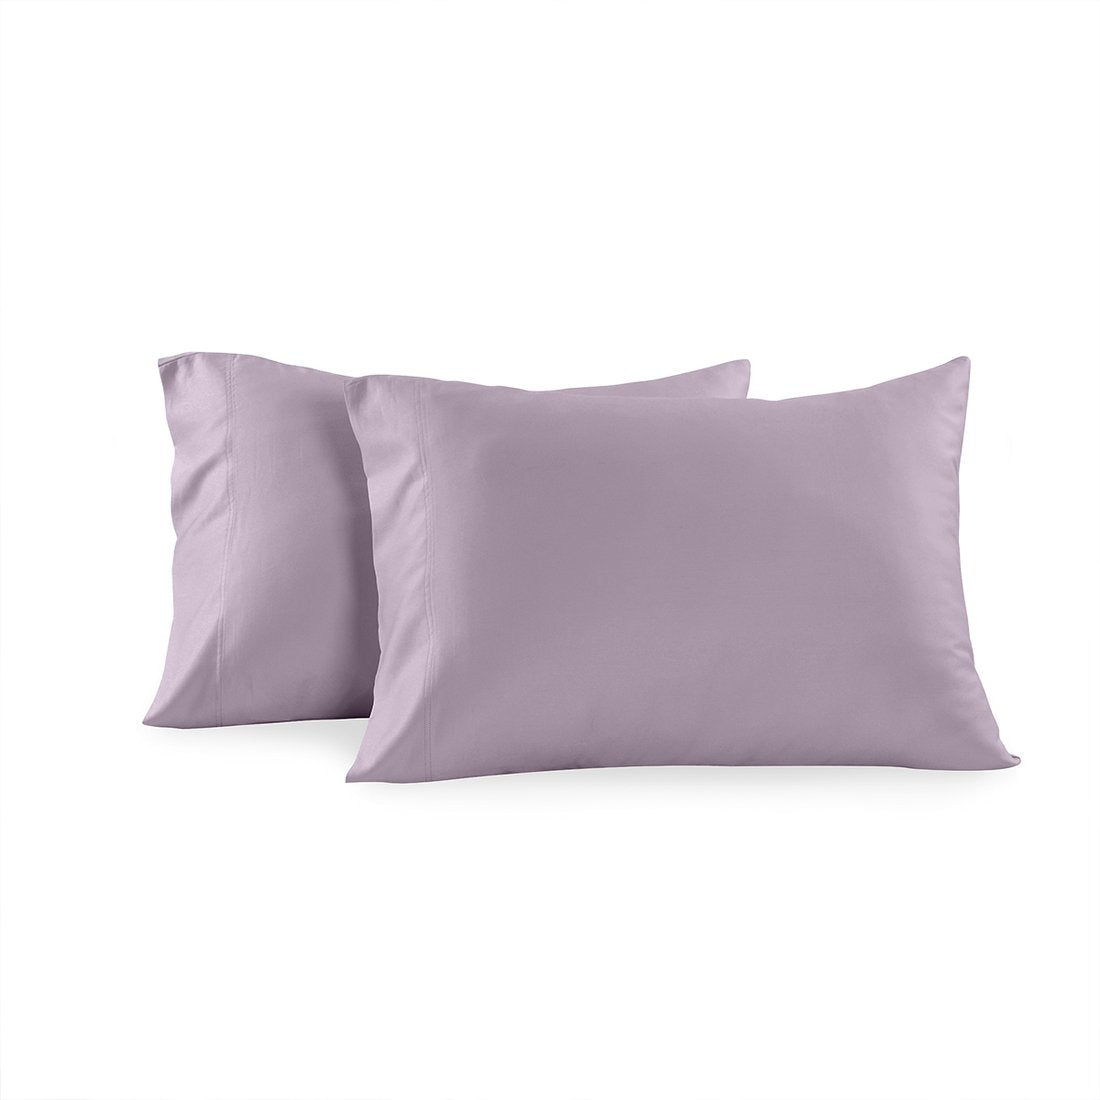 Solid 300 Thread Count Pillowcases (Pair)